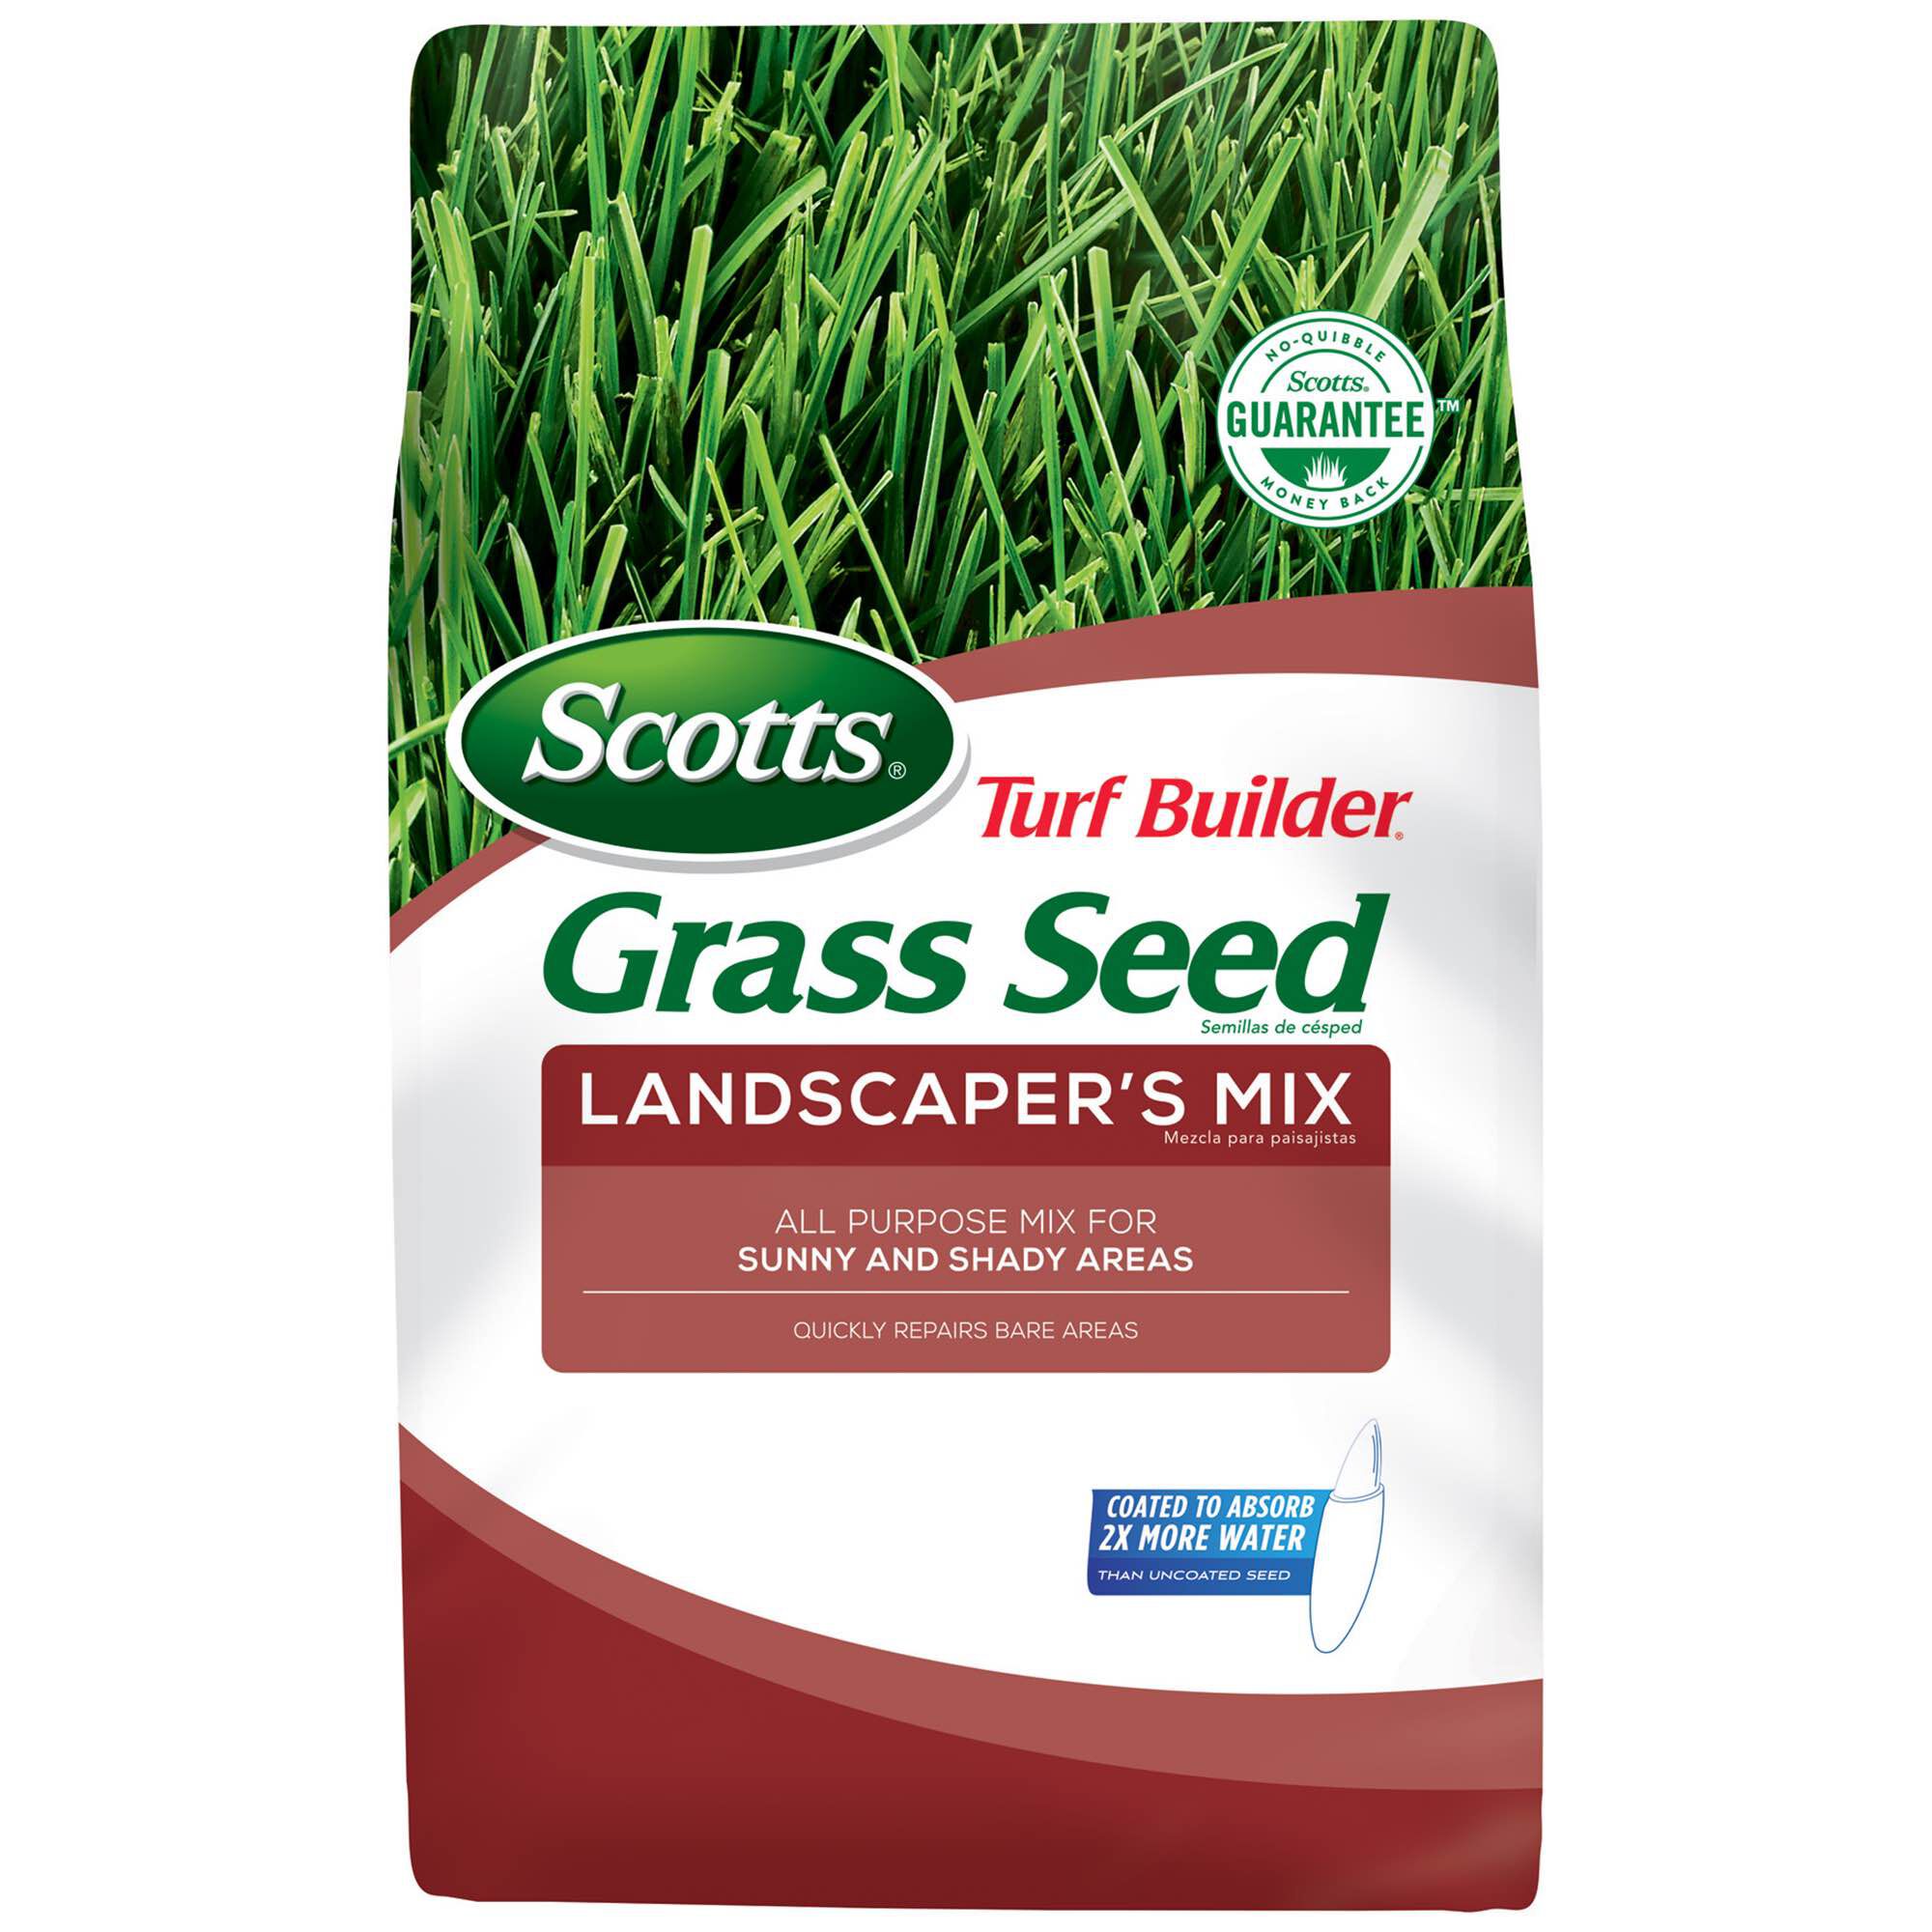 Image of The Andersons Turf Builder Grass Seed image